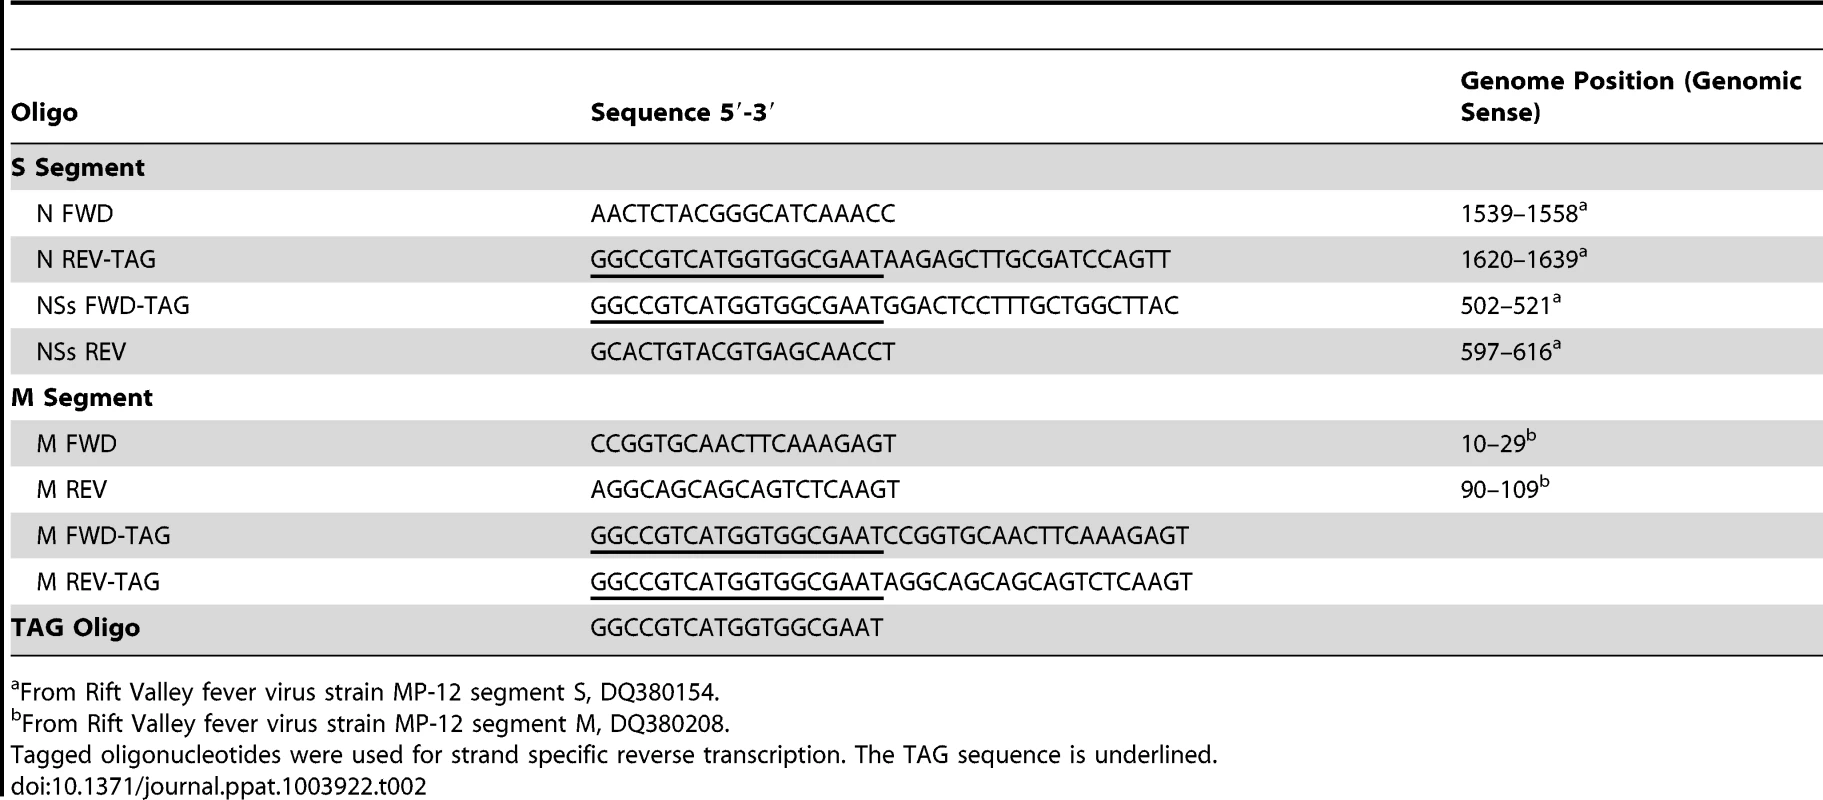 Oligonucleotides used in reverse transcription and qRT-PCR reactions.